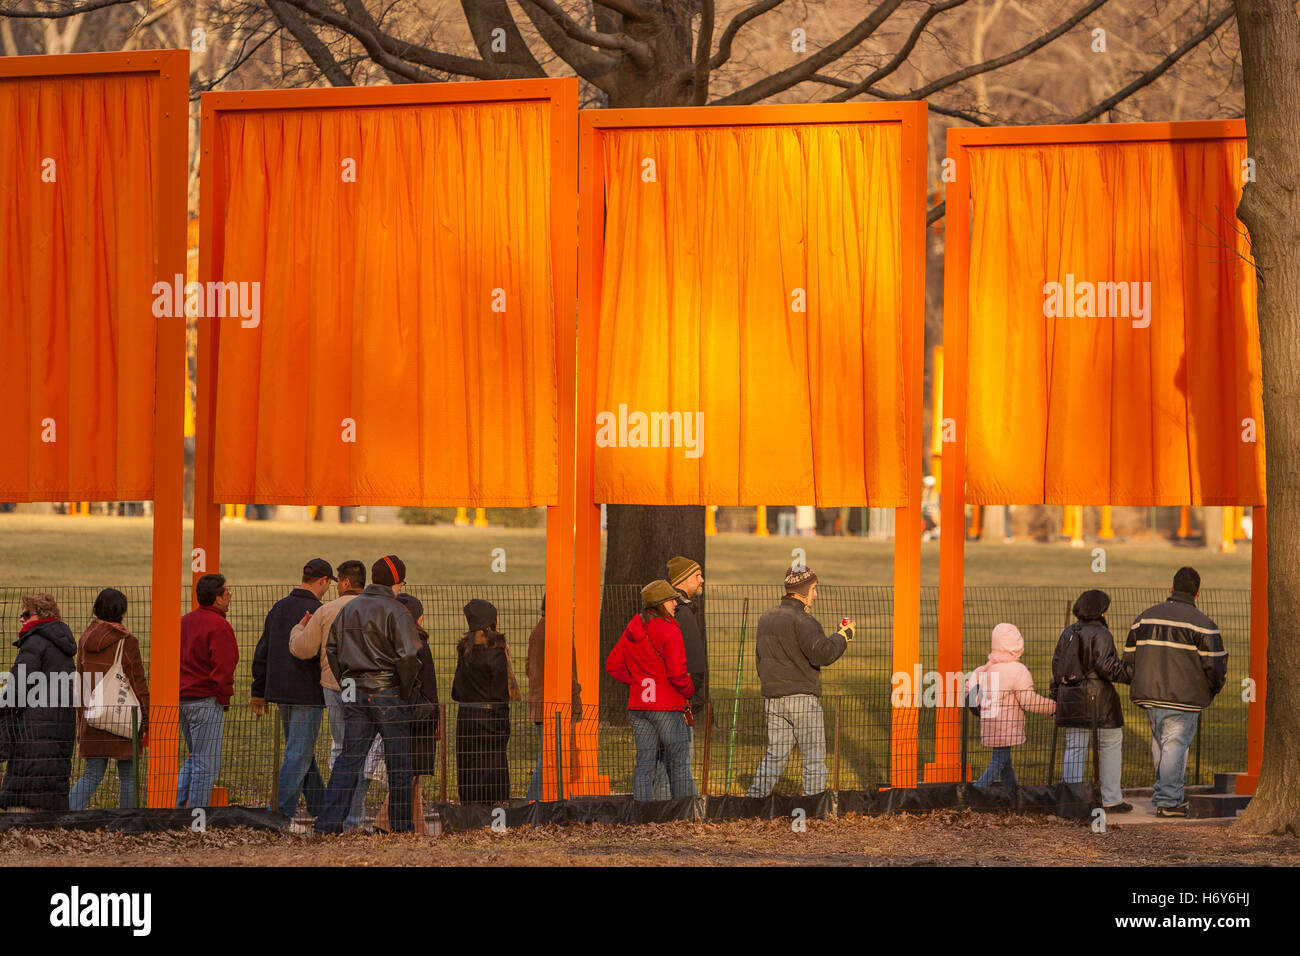 NEW YORK, NEW YORK, USA - 'The Gates' public art installation in Central Park by artists Christo and Jean-Claude. Stock Photo